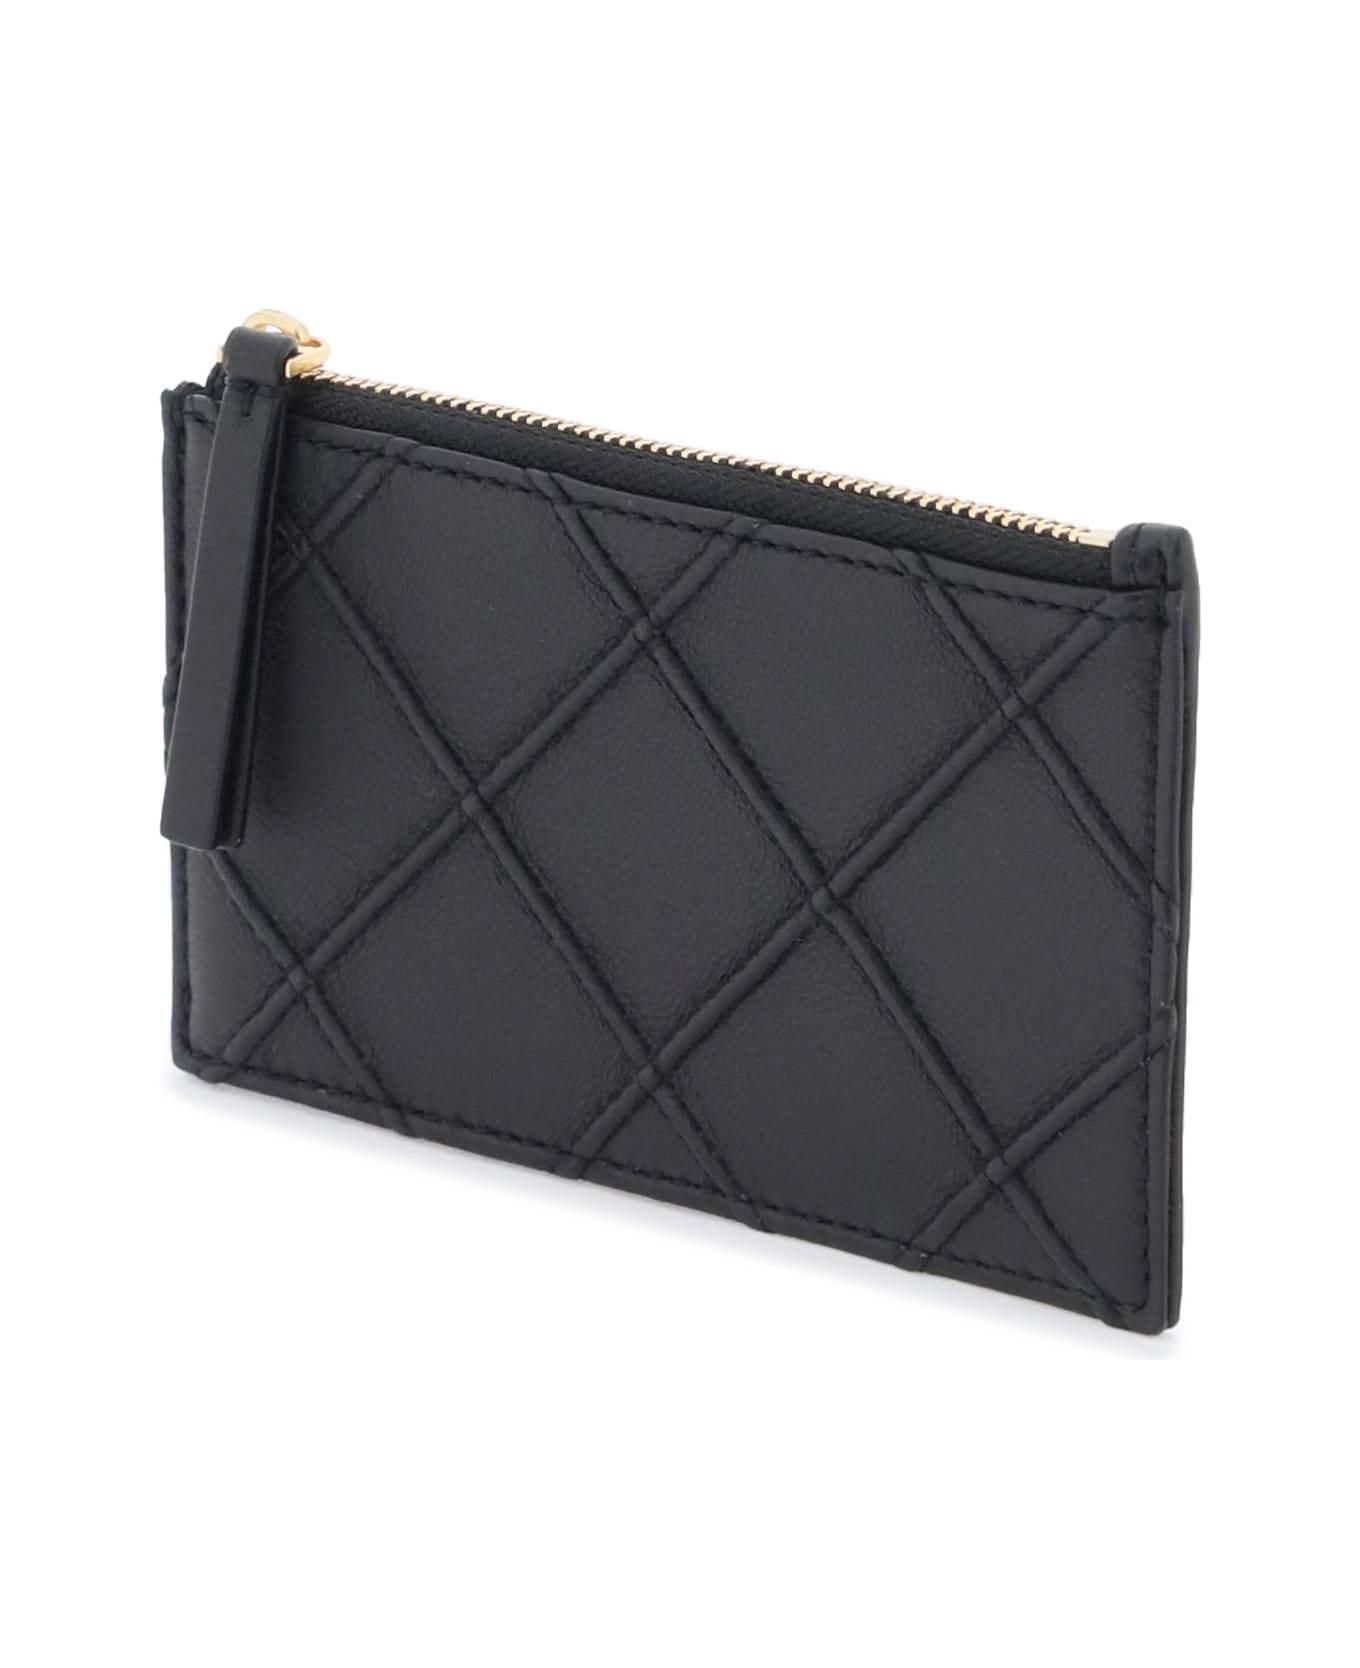 Tory Burch Smooth Leather Card Holder - Black